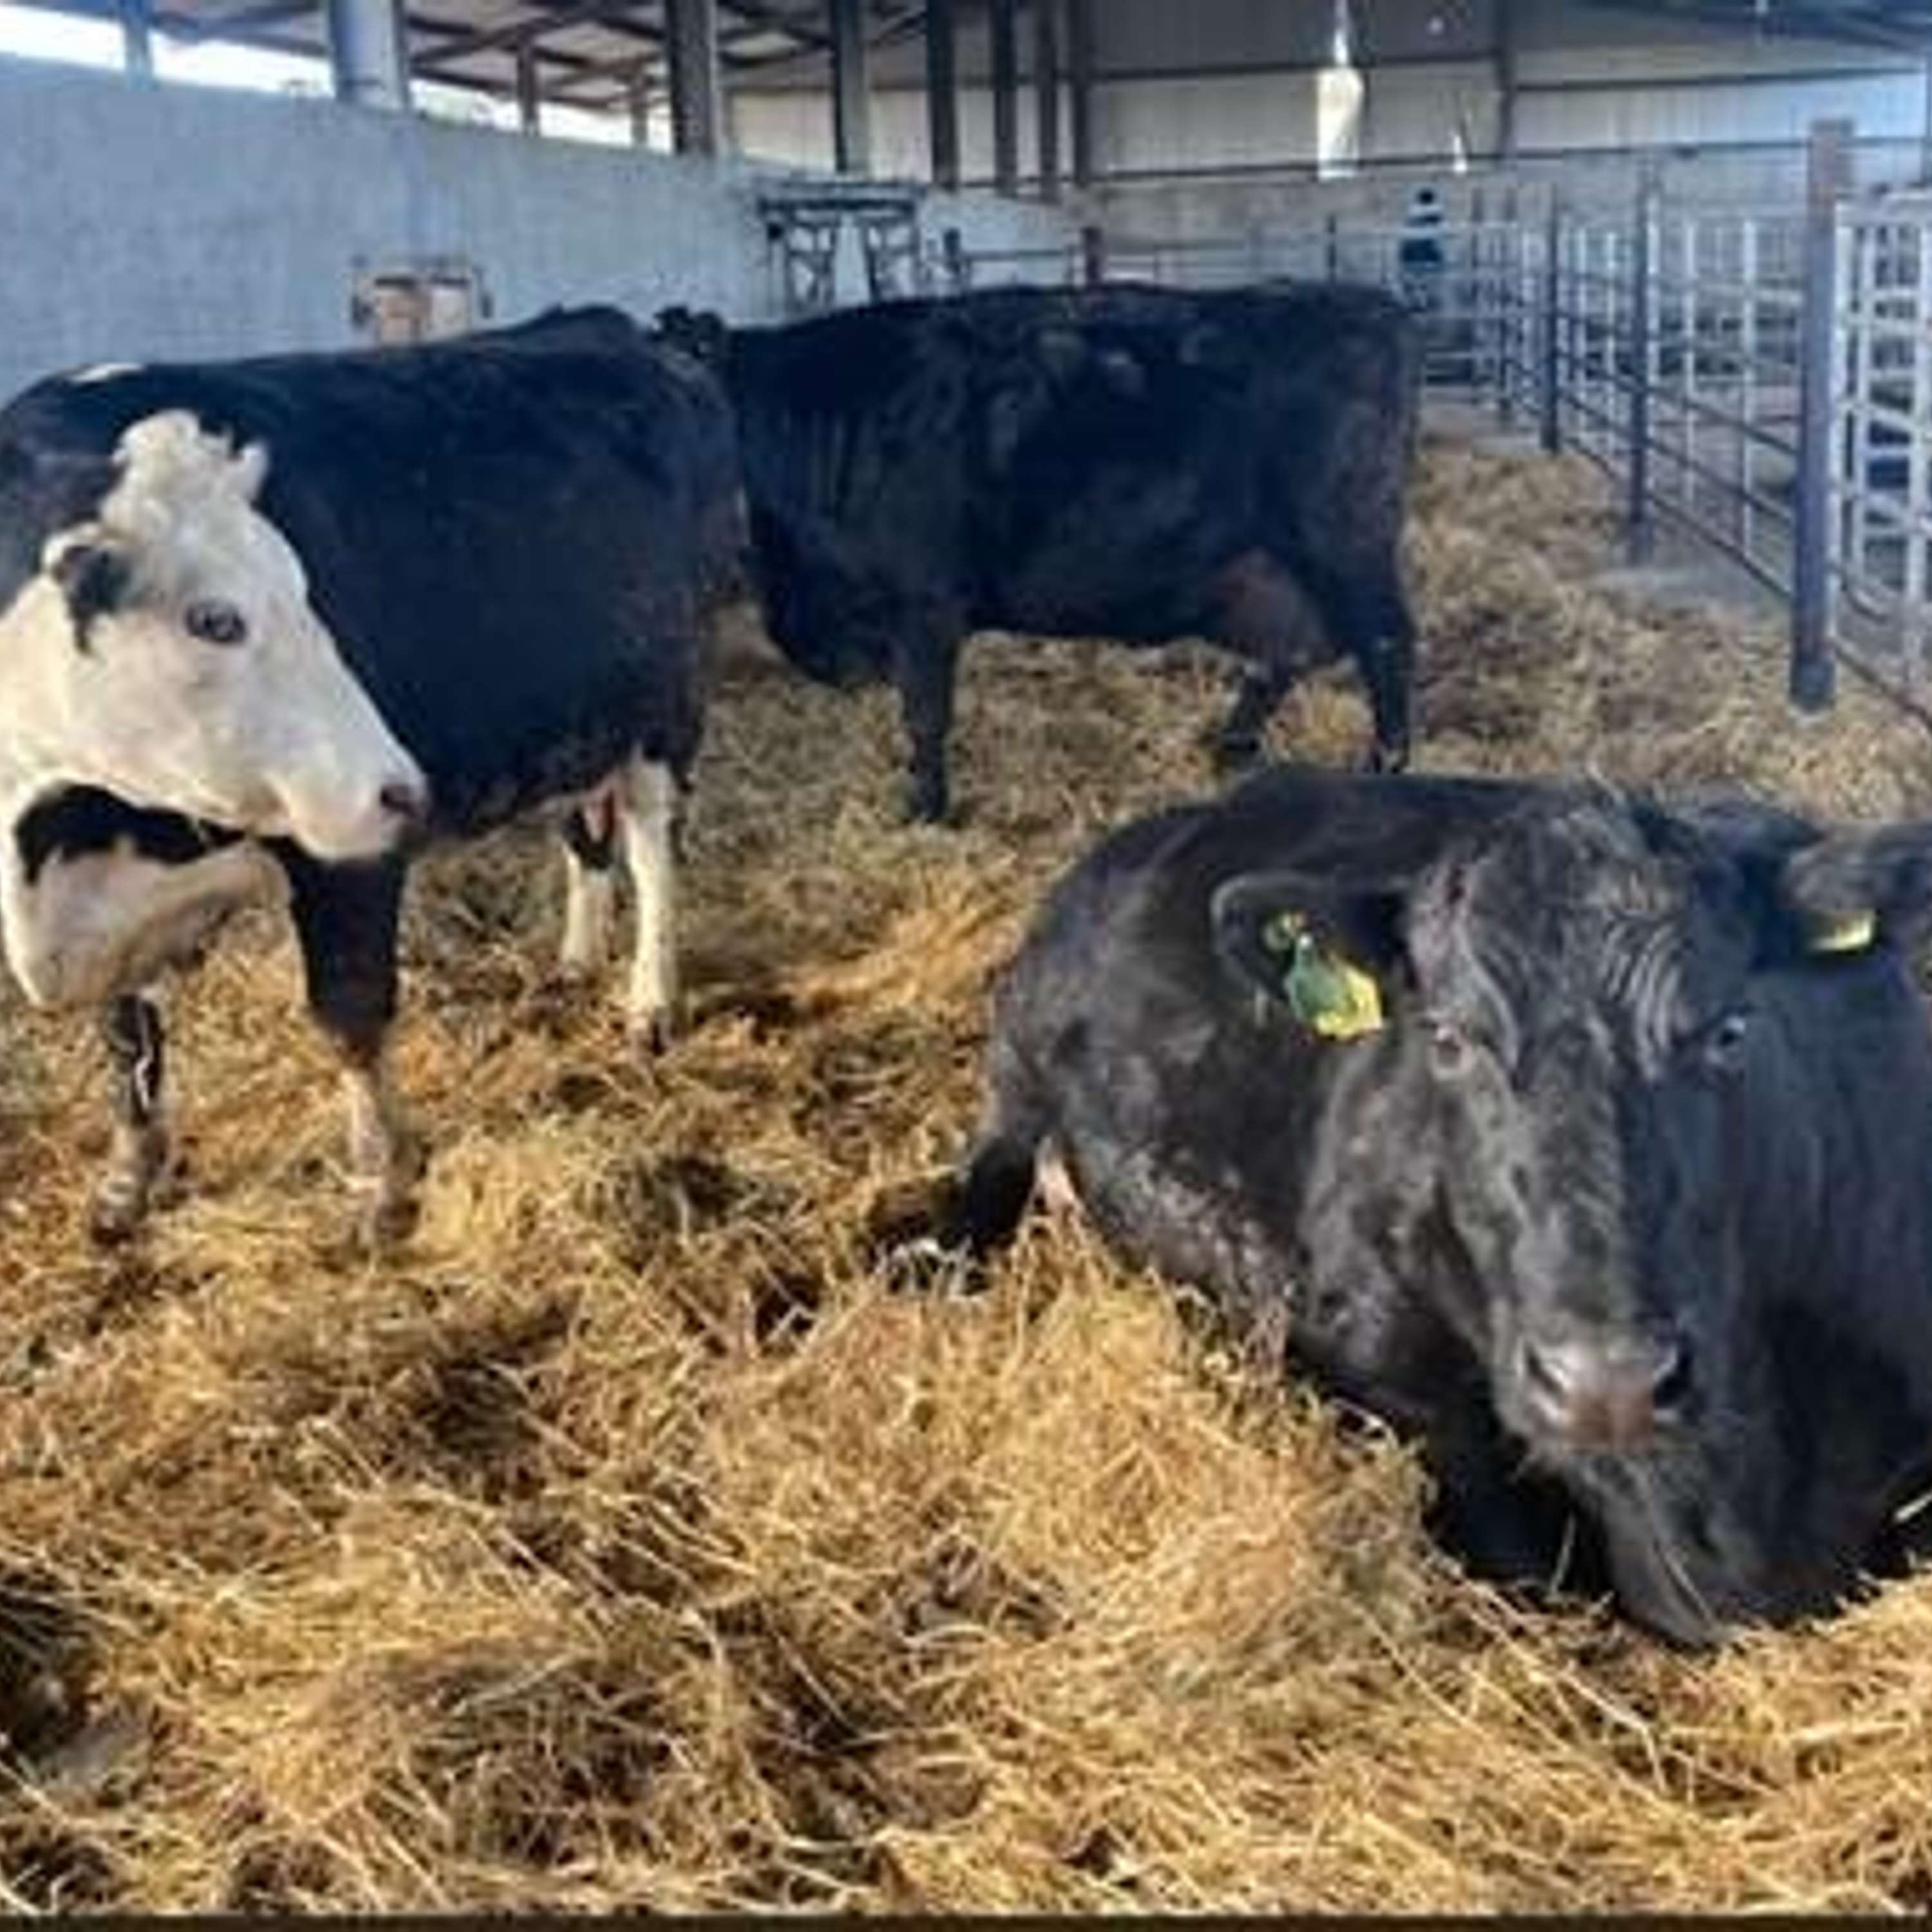 Newford farm update – the move to Roscommon, calving preparation and performance review